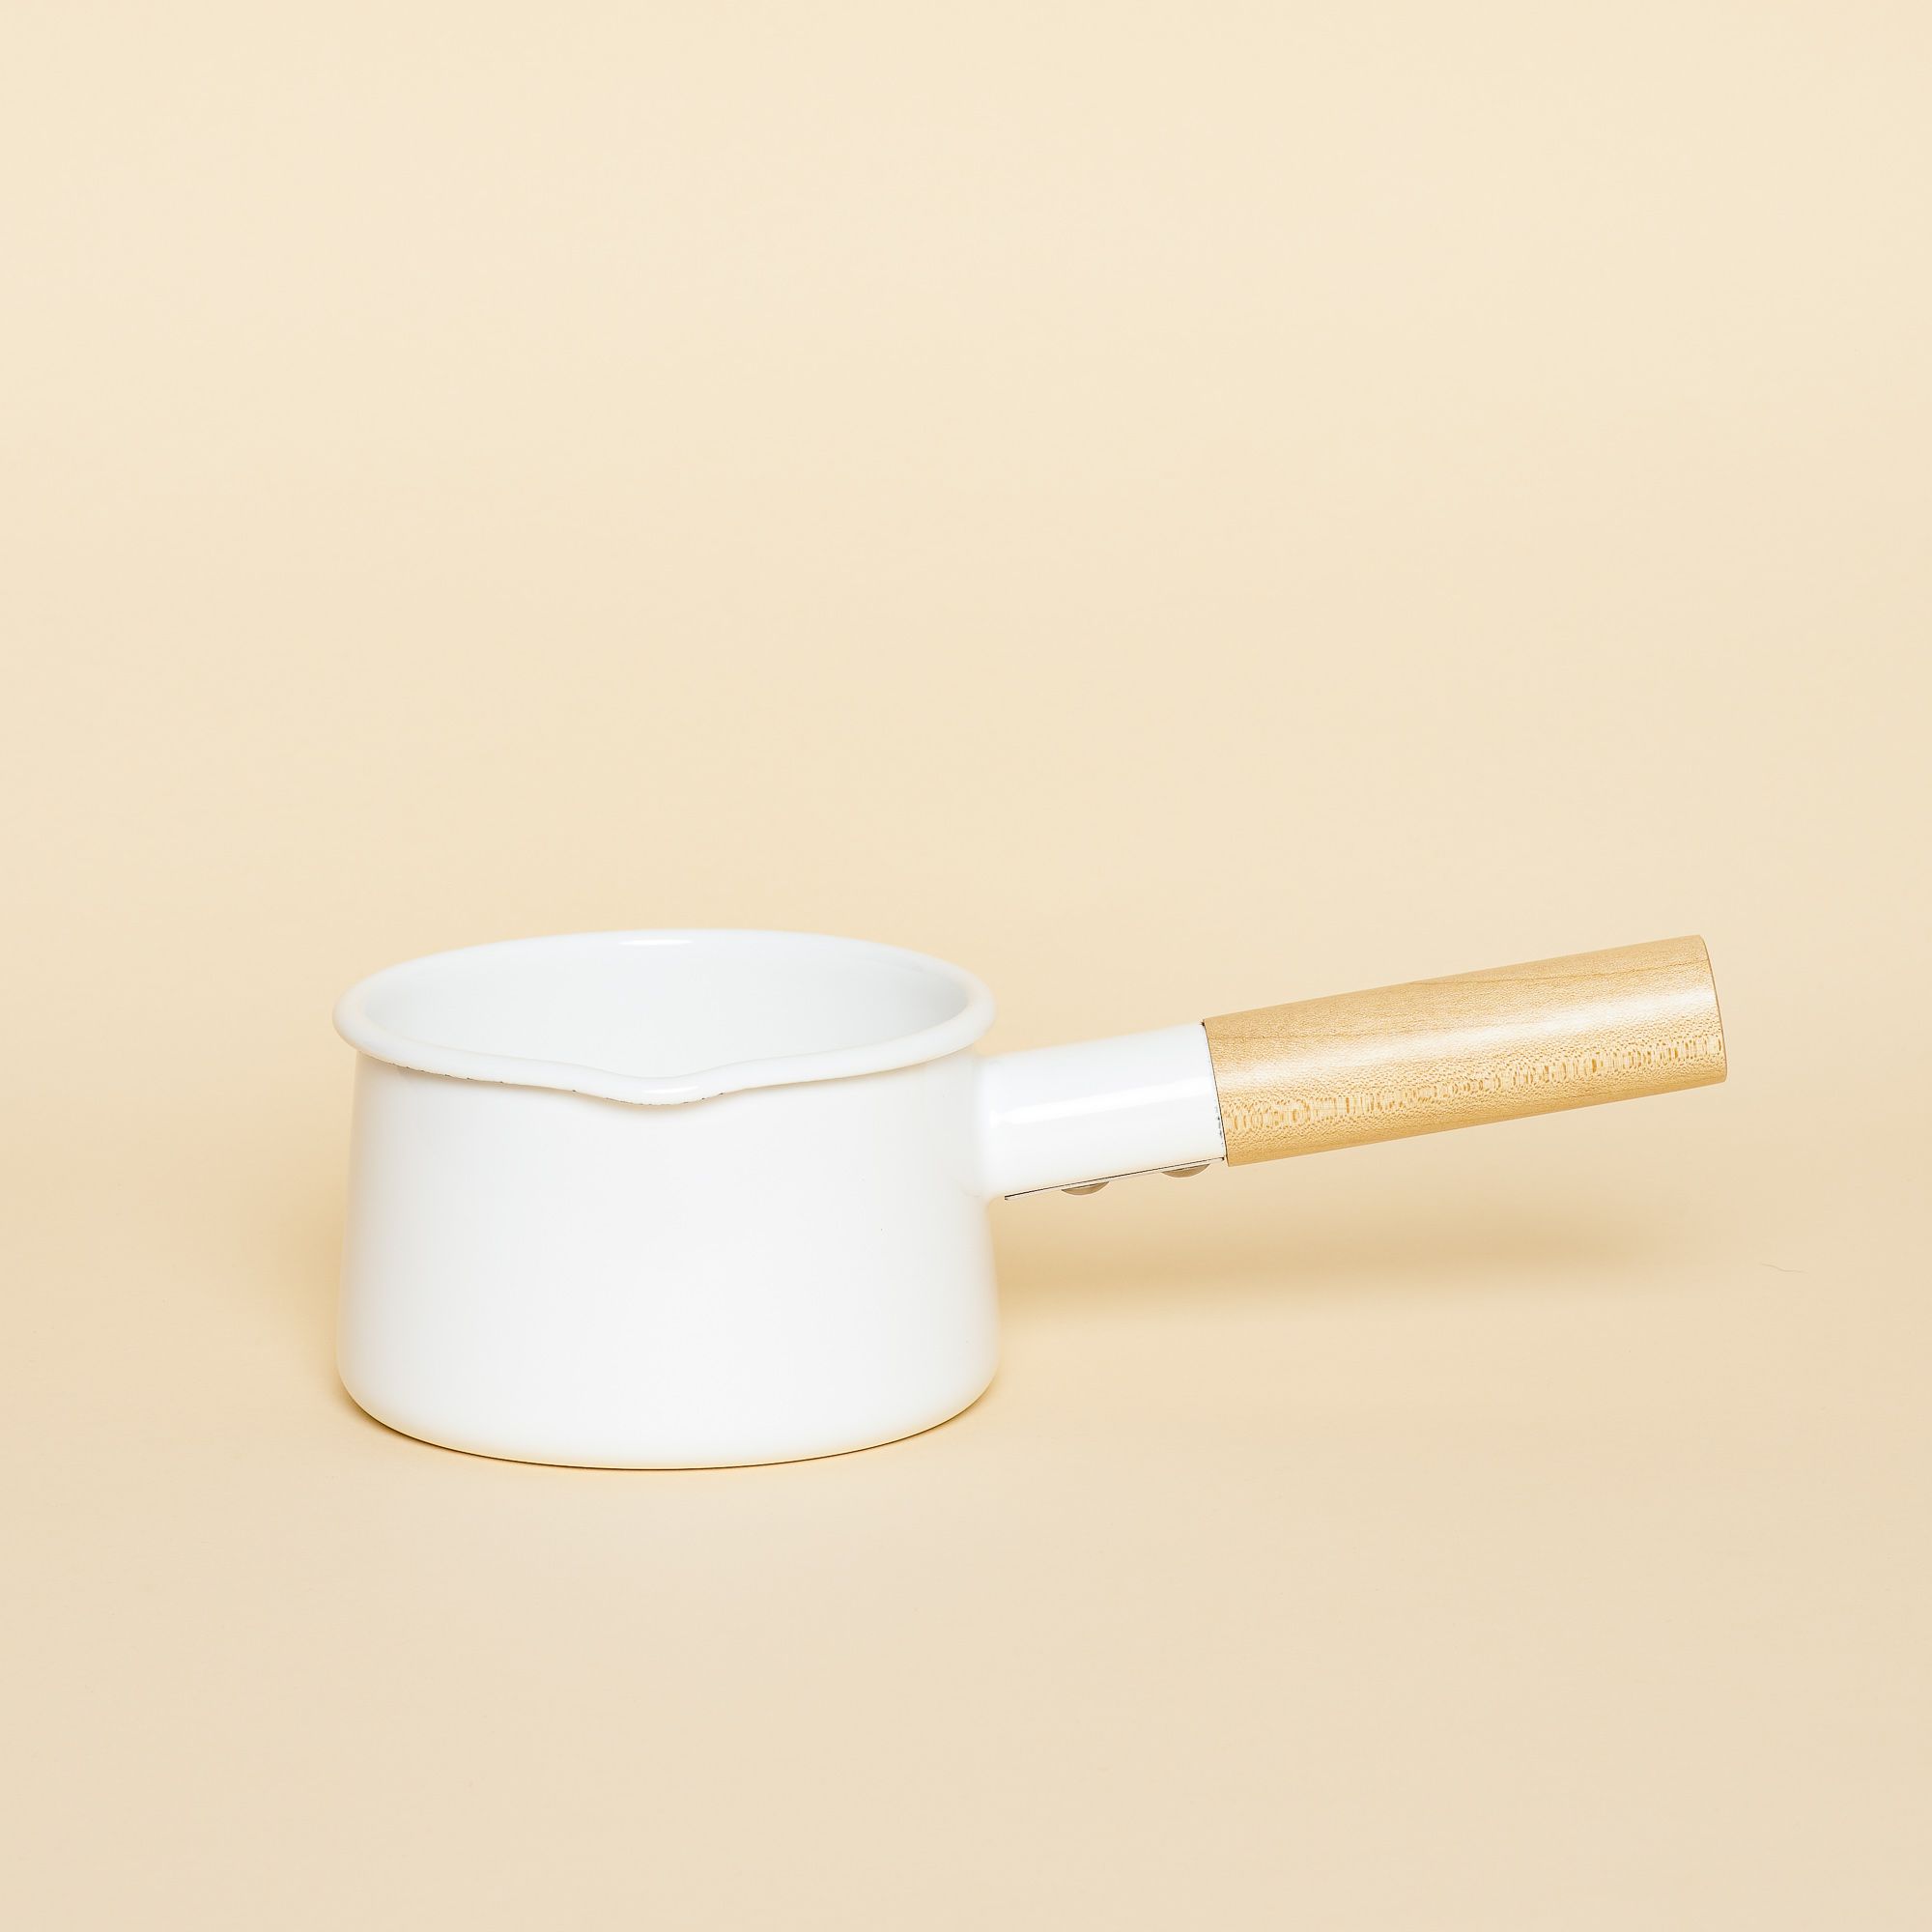 A small white enamel pan with a wooden handle. Sleekly designed.